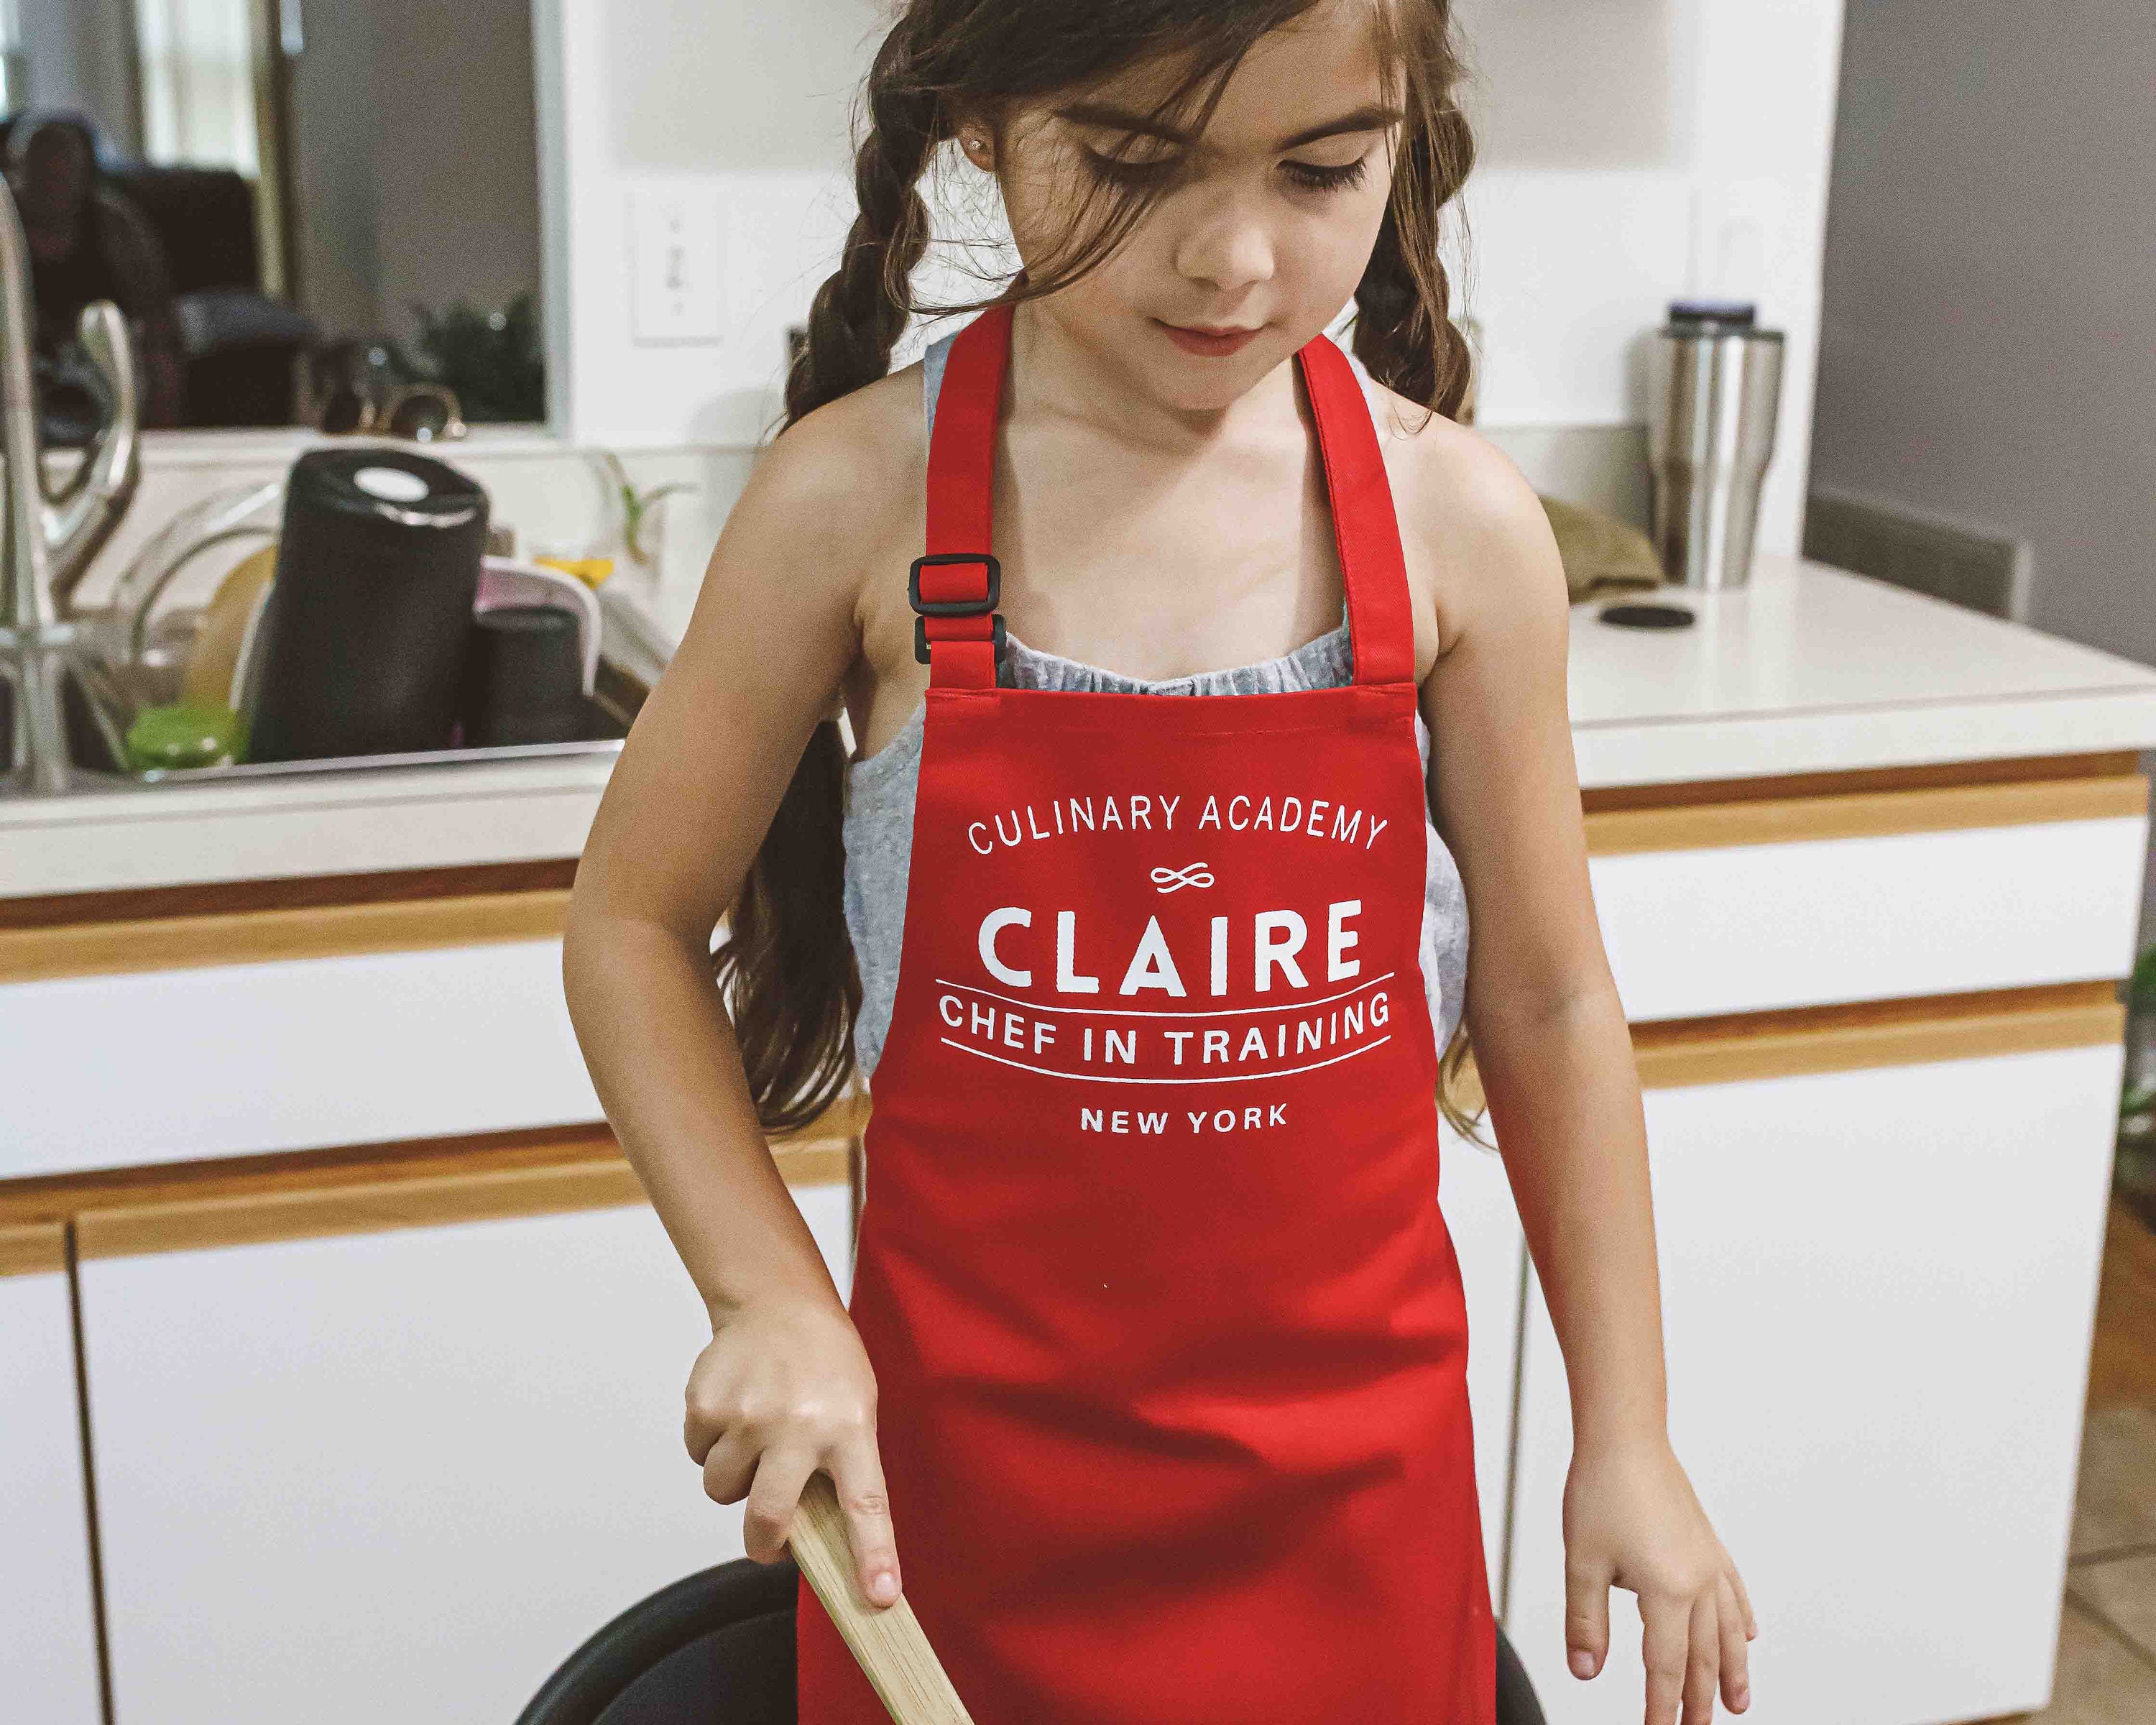 Personalized Mommy and Me Embroidered BBQ Aprons – Life Has Just Begun